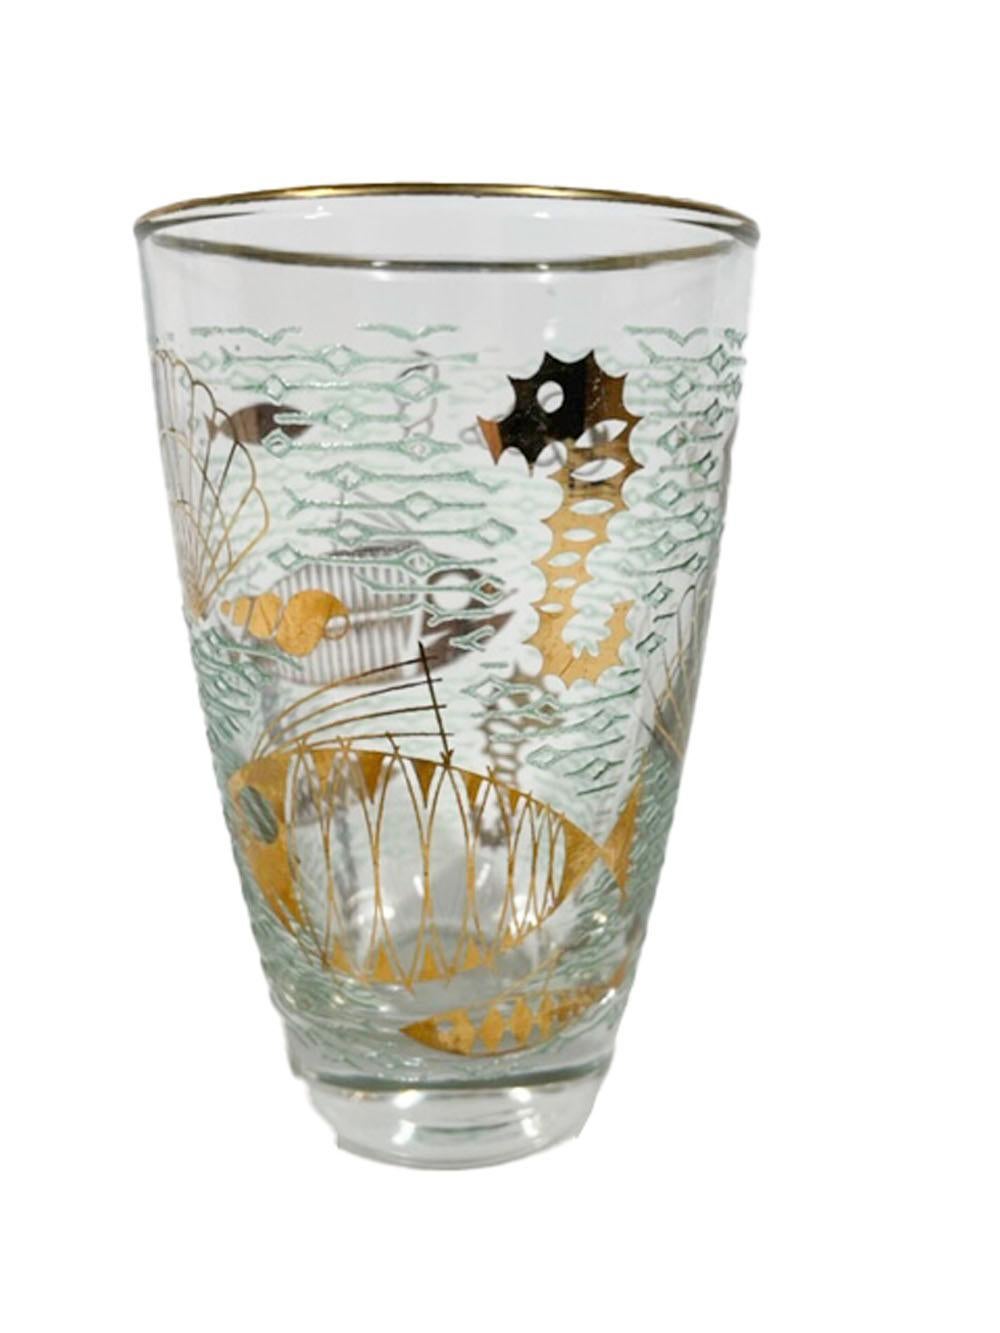 Set of 6 Libbey Glass Tumblers in the Marine Life Pattern, Discontinued in 1959 For Sale 2